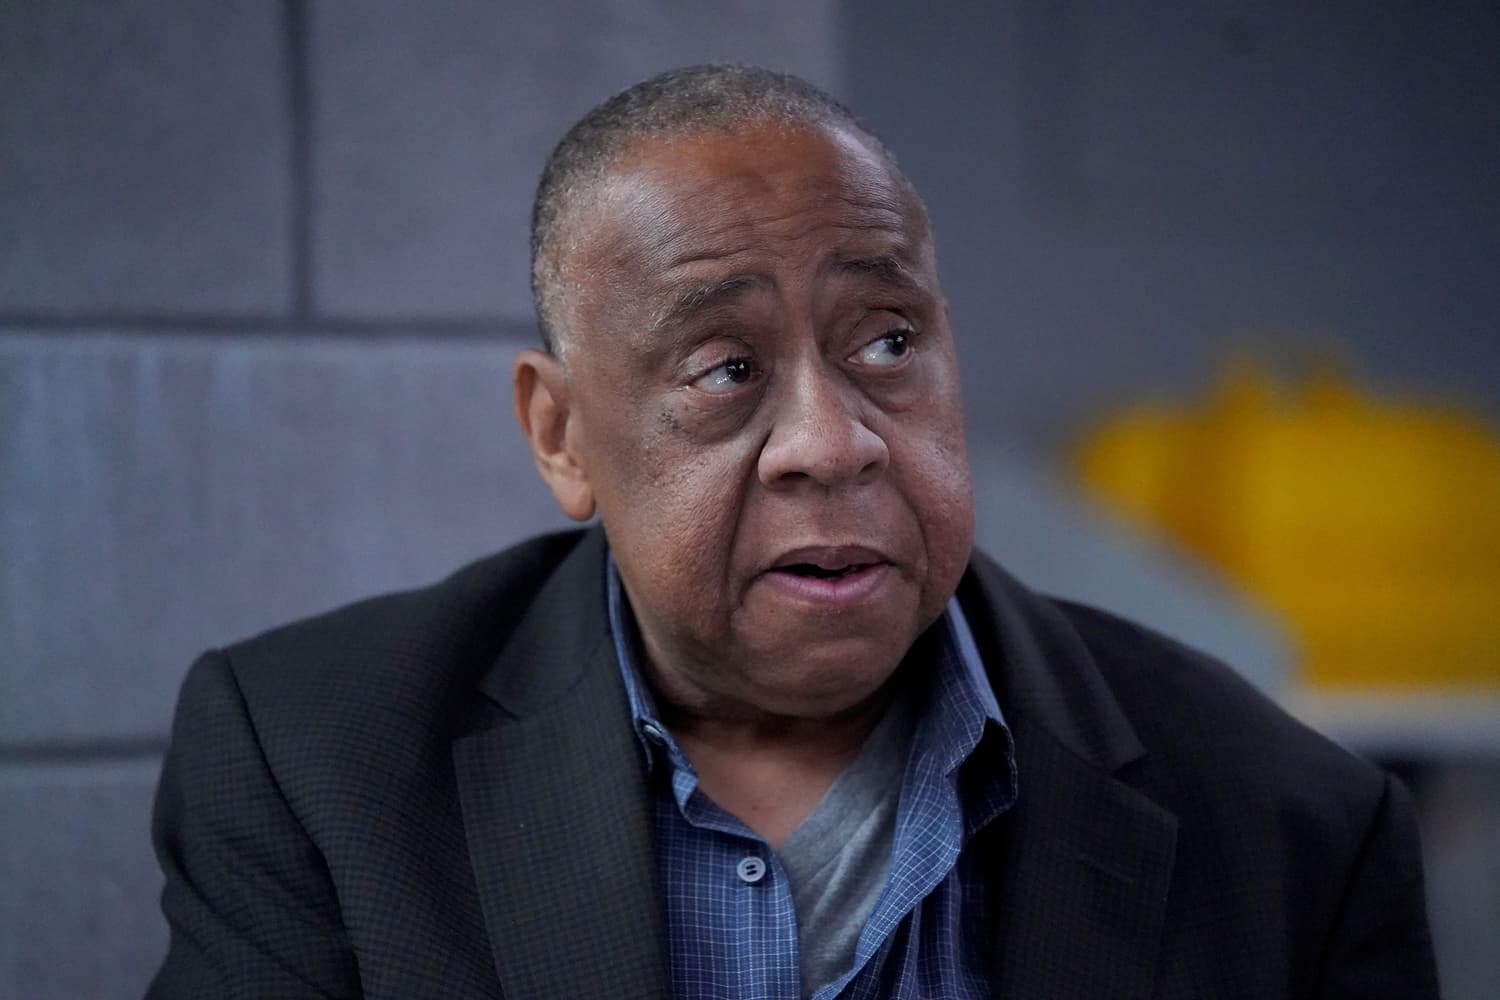 DR. MARCUS BENSON (PLAYED BY BARRY SHABAKA HENLEY)